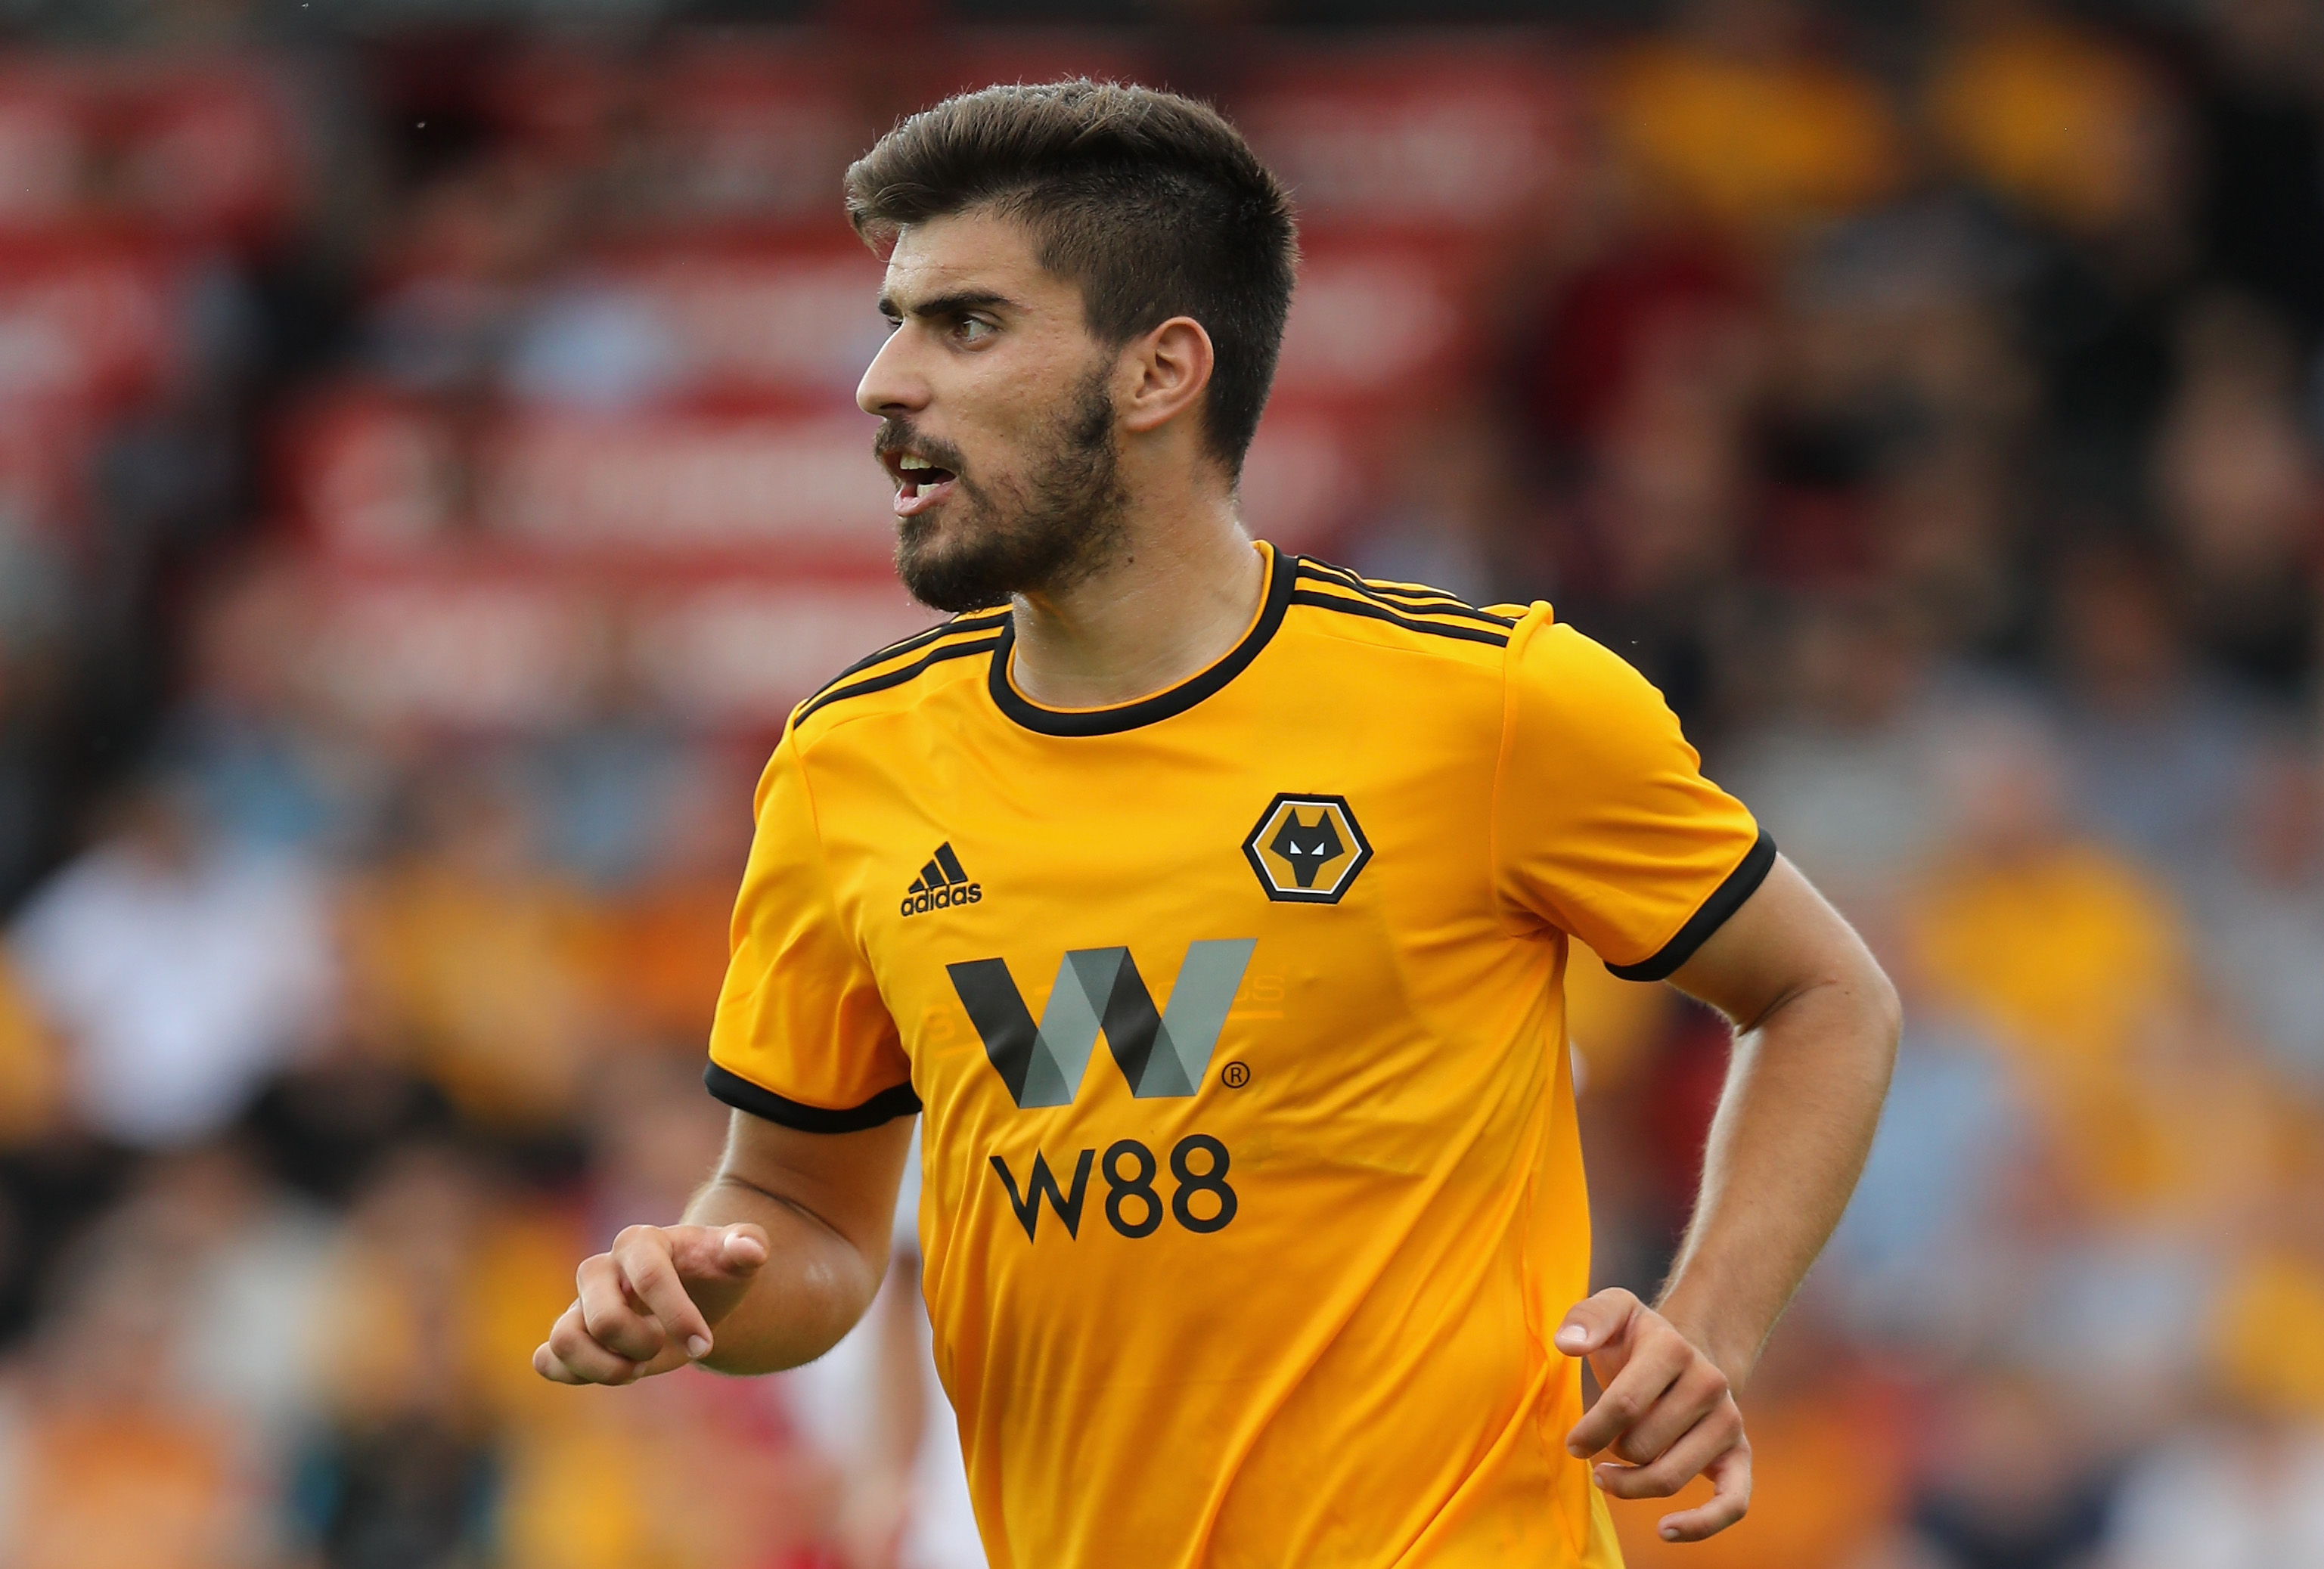 WALSALL, ENGLAND - JULY 19: Ruben Neves of Wolverhampton Wanderers looks on during the pre seaon friendly match between Wolverhampton Wanderers and Ajax at the Banks' Stadium on July 19, 2018 in Walsall, England. (Photo by David Rogers/Getty Images)